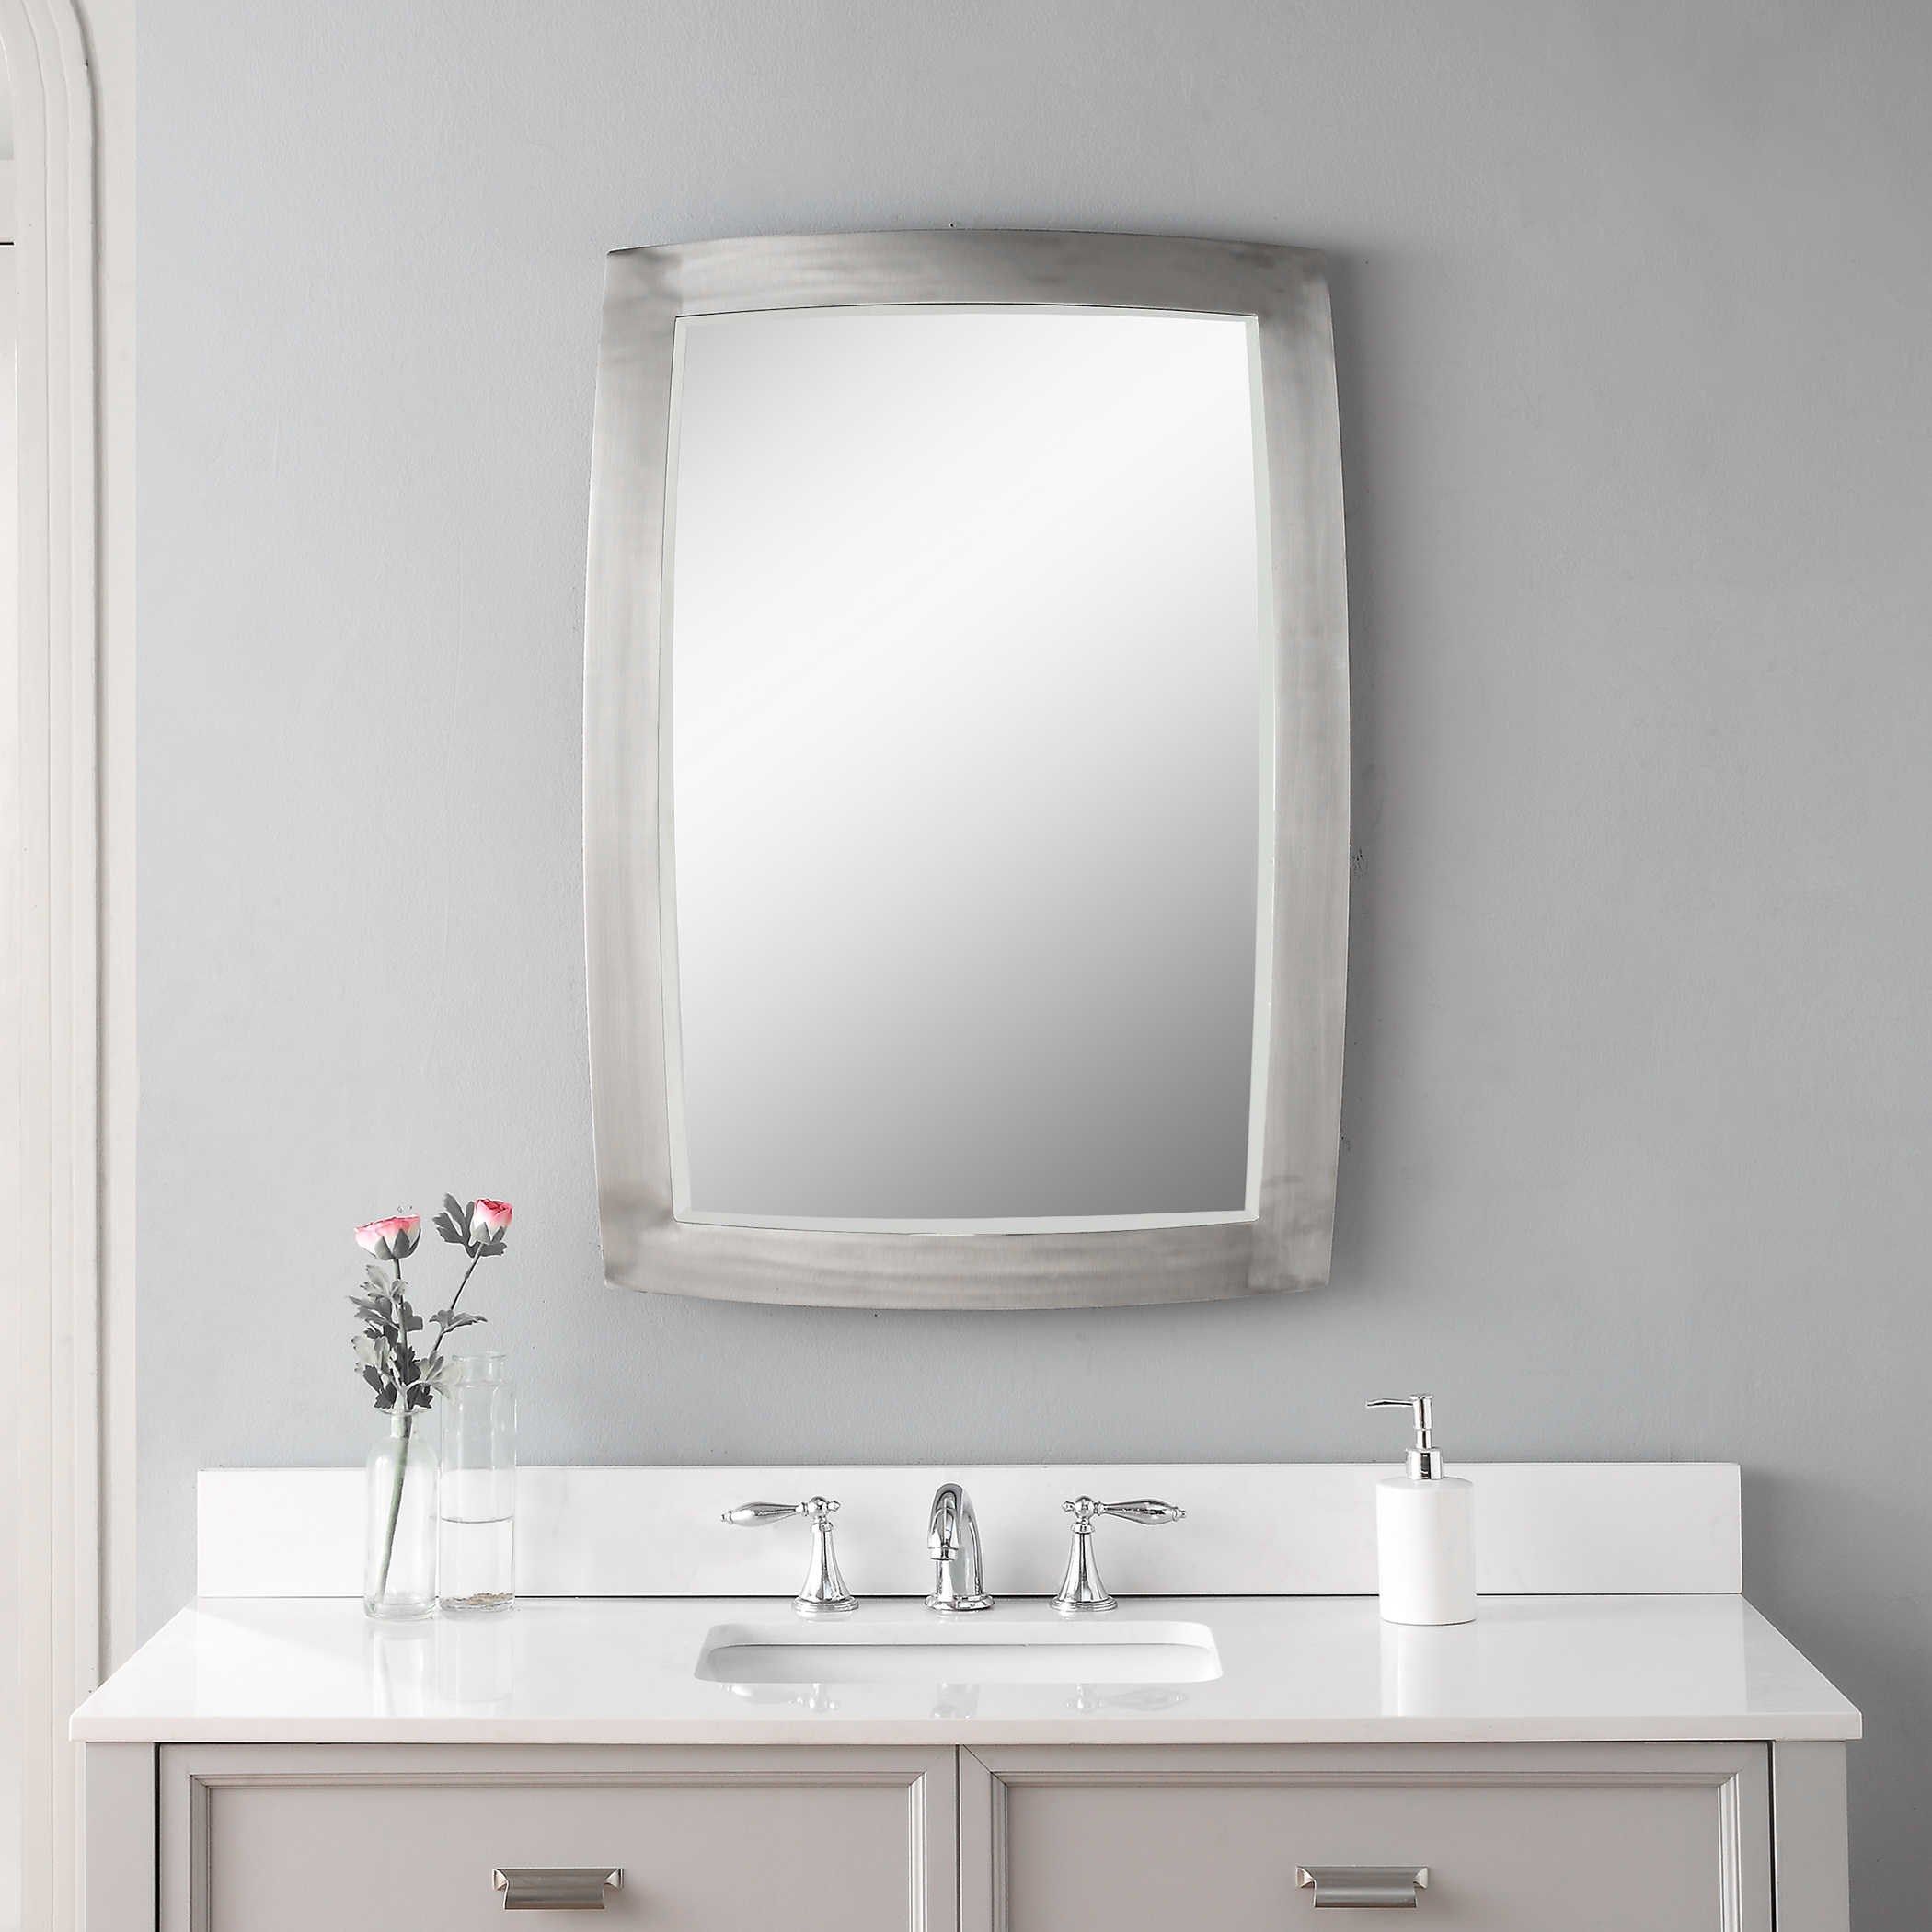 Uttermost Mirrors Haskill Brushed Nickel Mirror | Sheely'S Furniture Regarding Drake Brushed Steel Wall Mirrors (View 3 of 15)